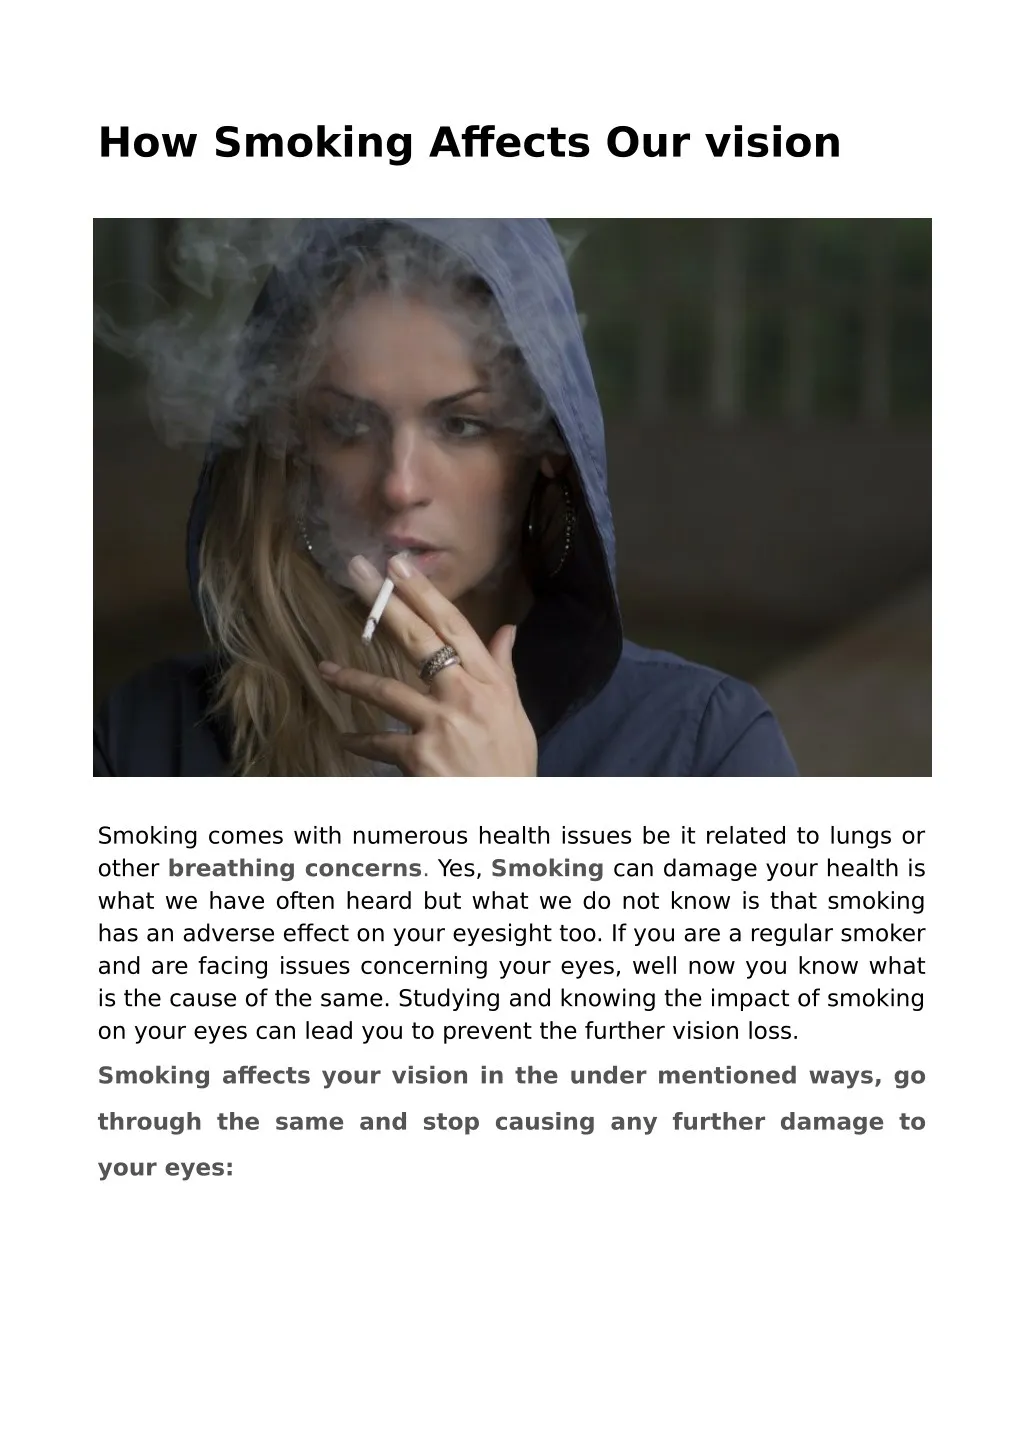 how smoking affects our vision